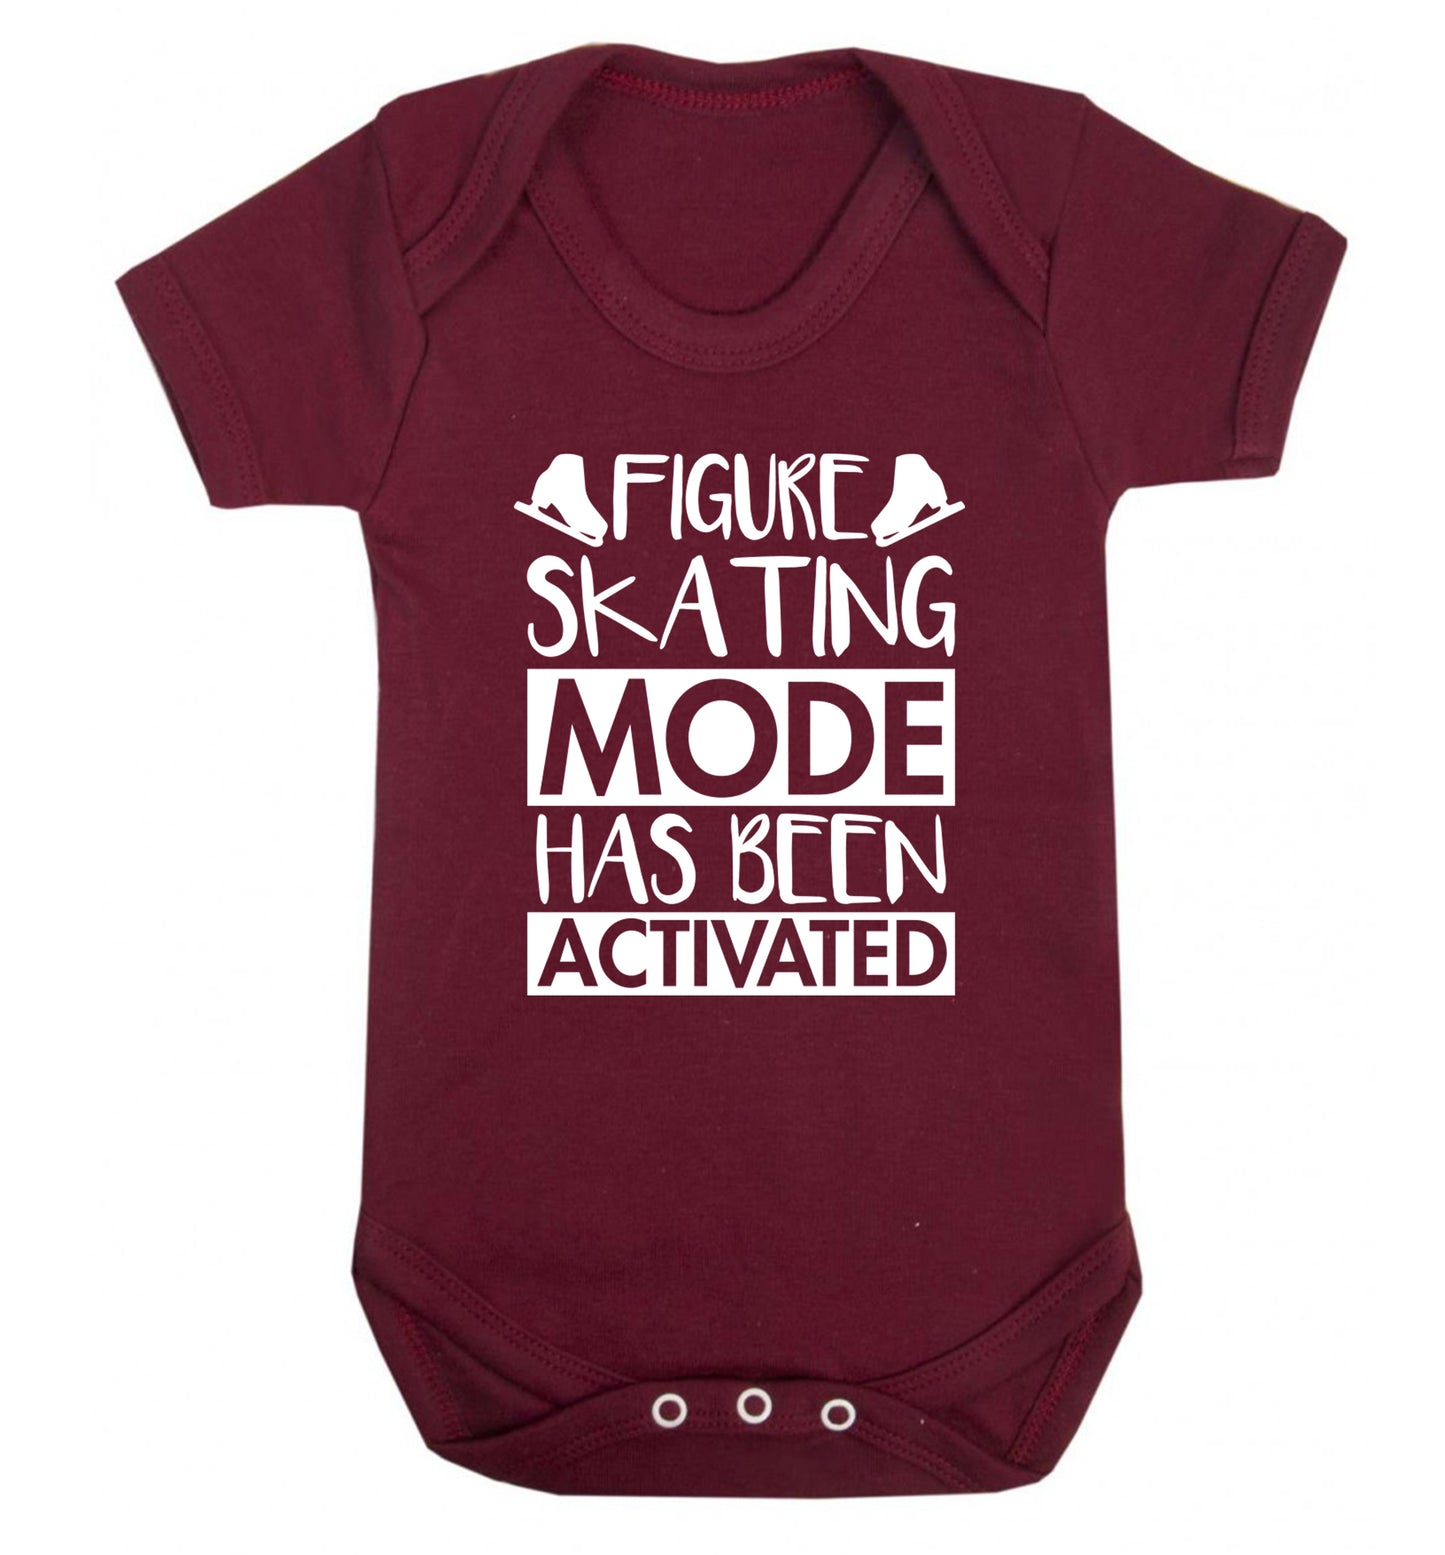 Figure skating mode activated Baby Vest maroon 18-24 months